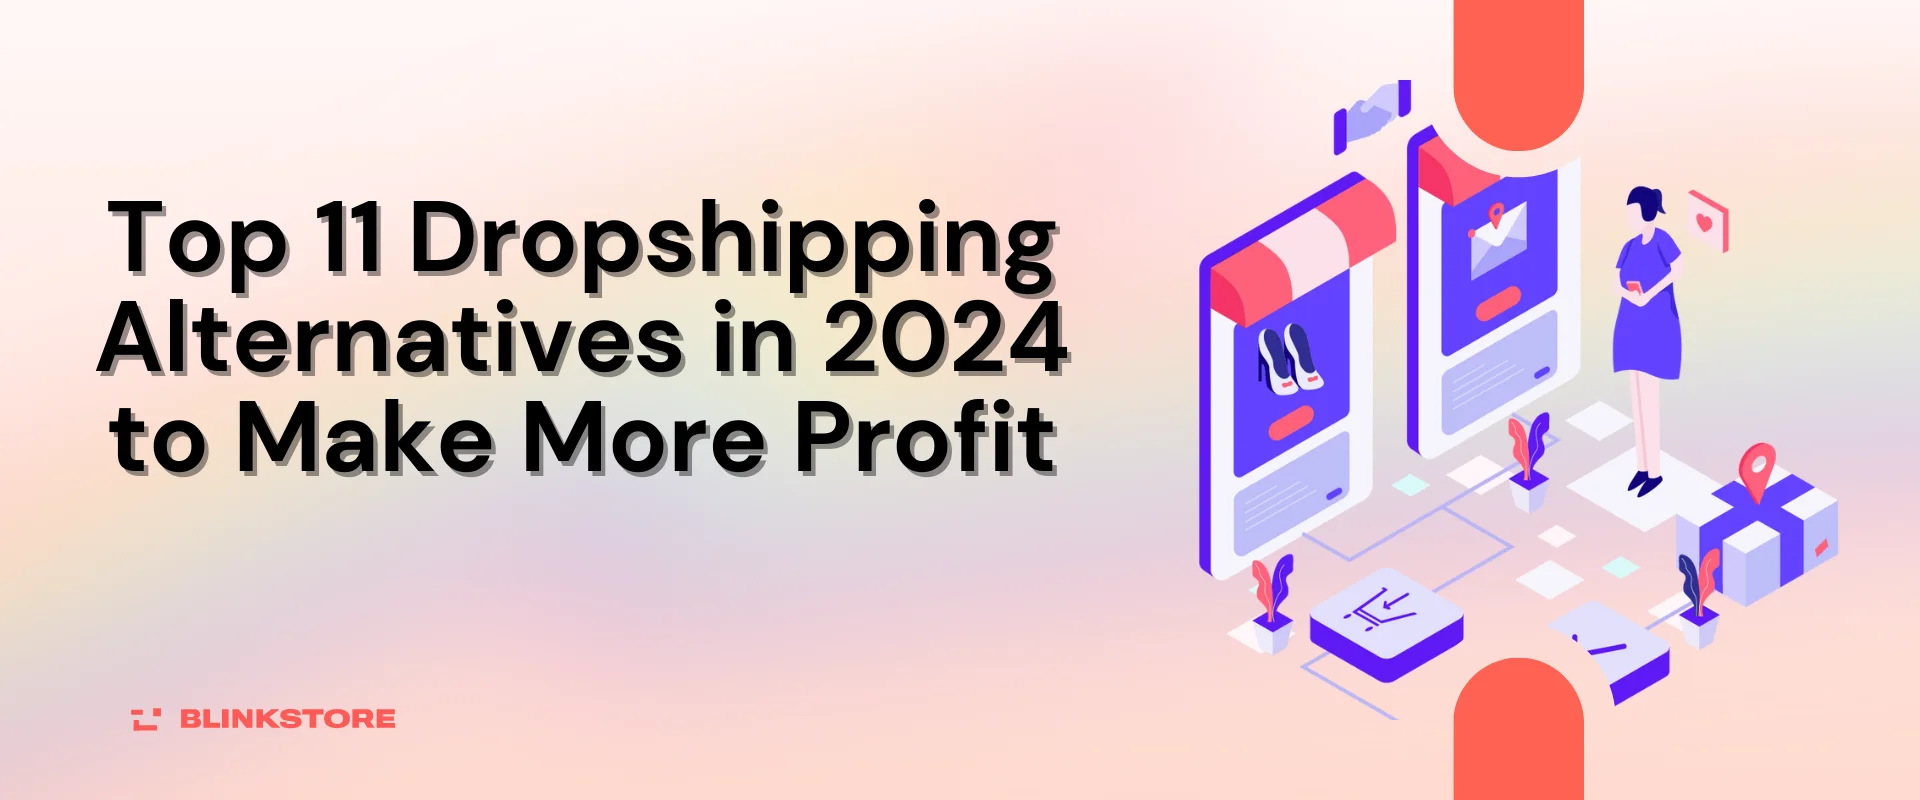 Top 11 Dropshipping Alternatives in 2024 to Make More Profit